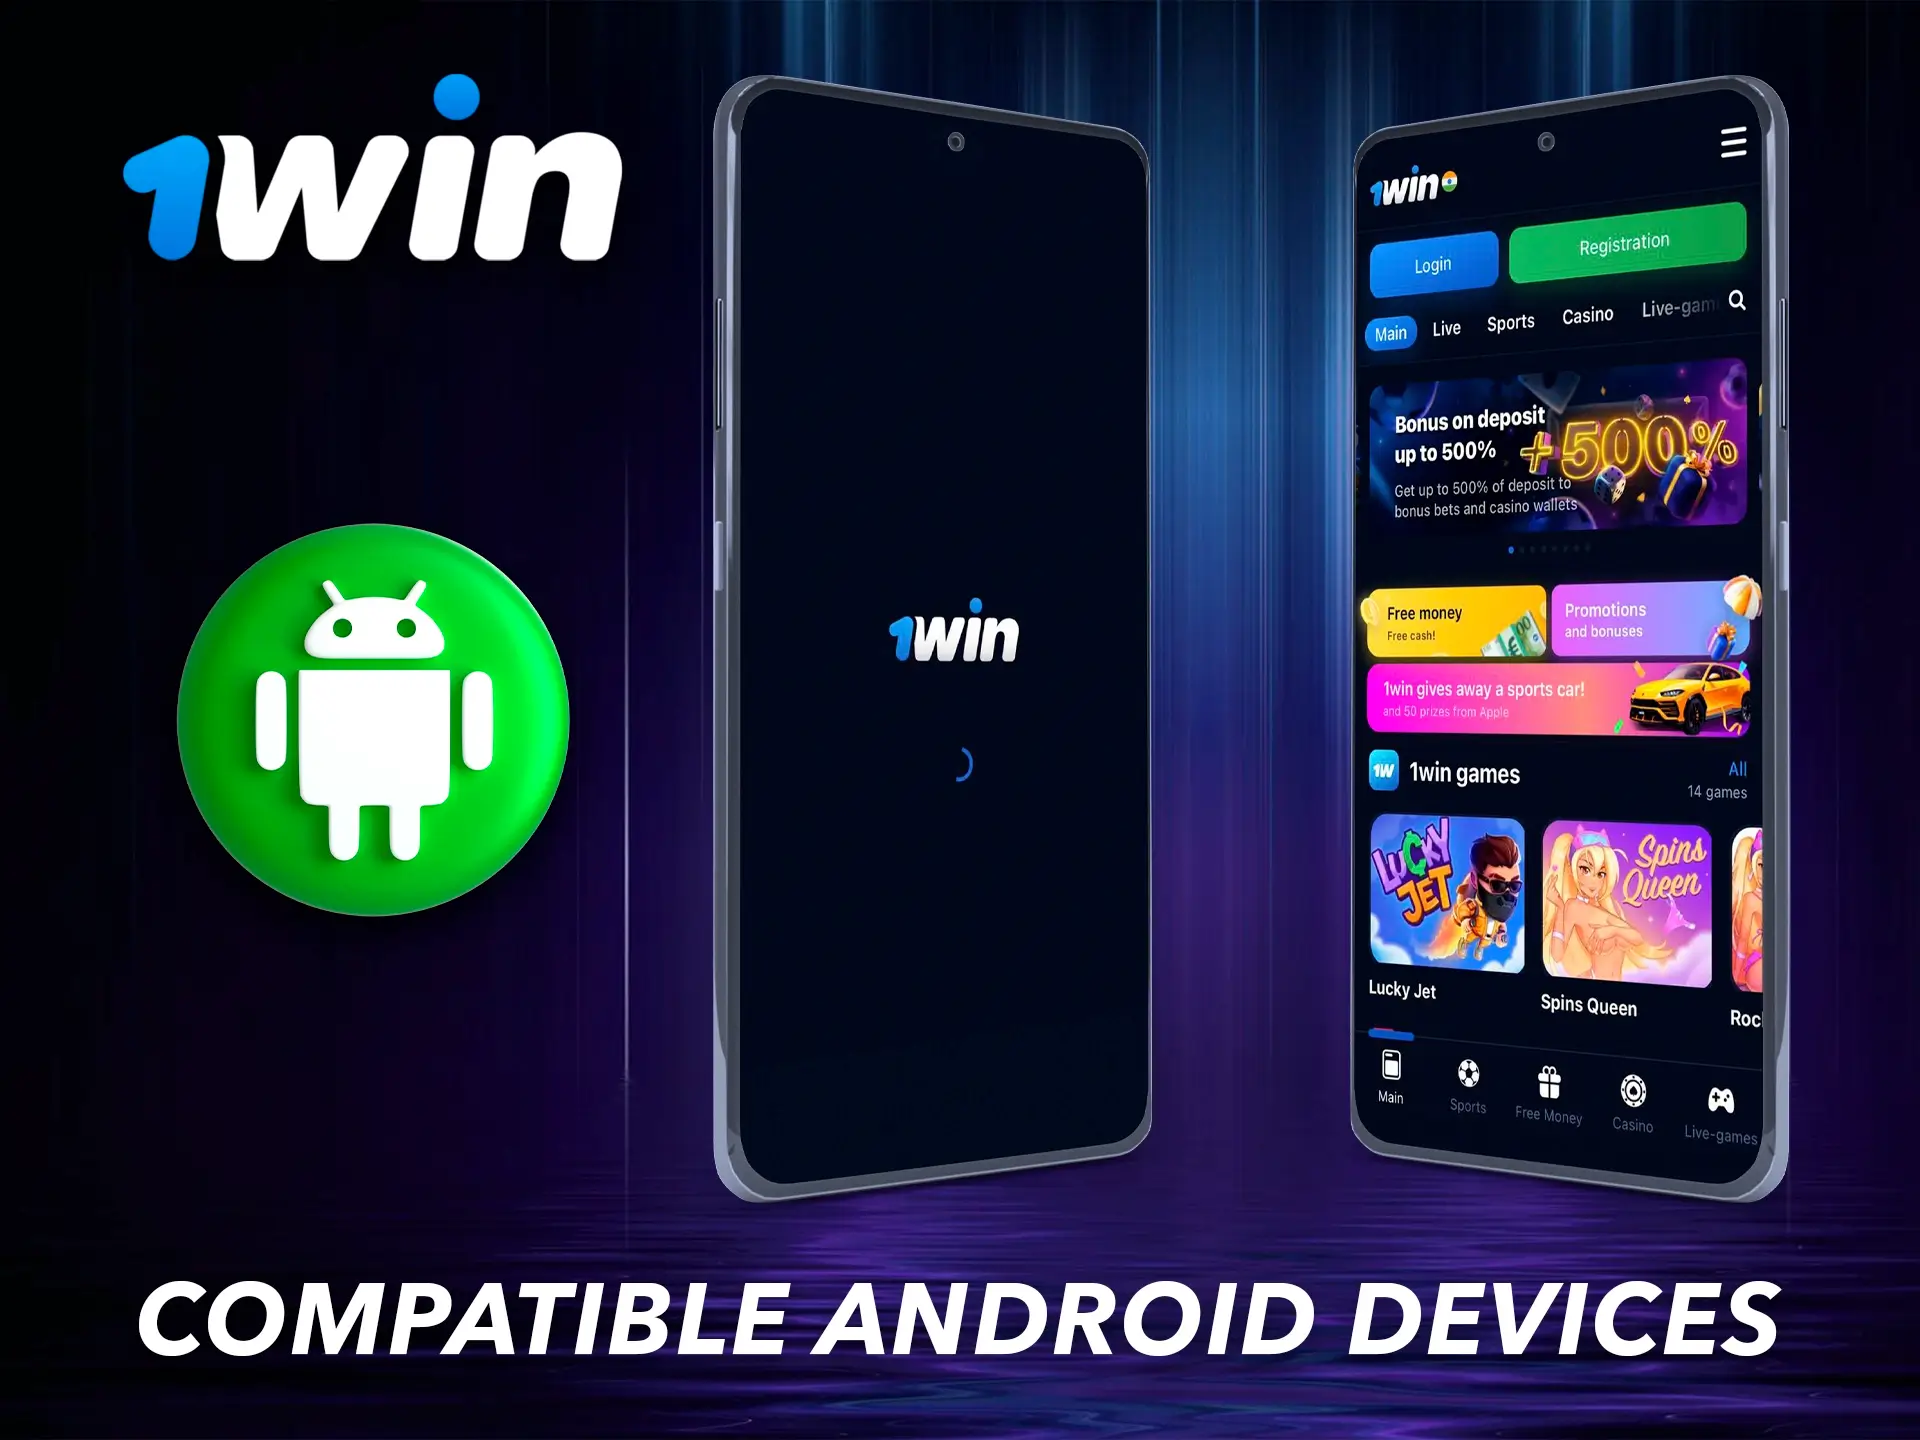 The 1Win app adapts perfectly to any android device.